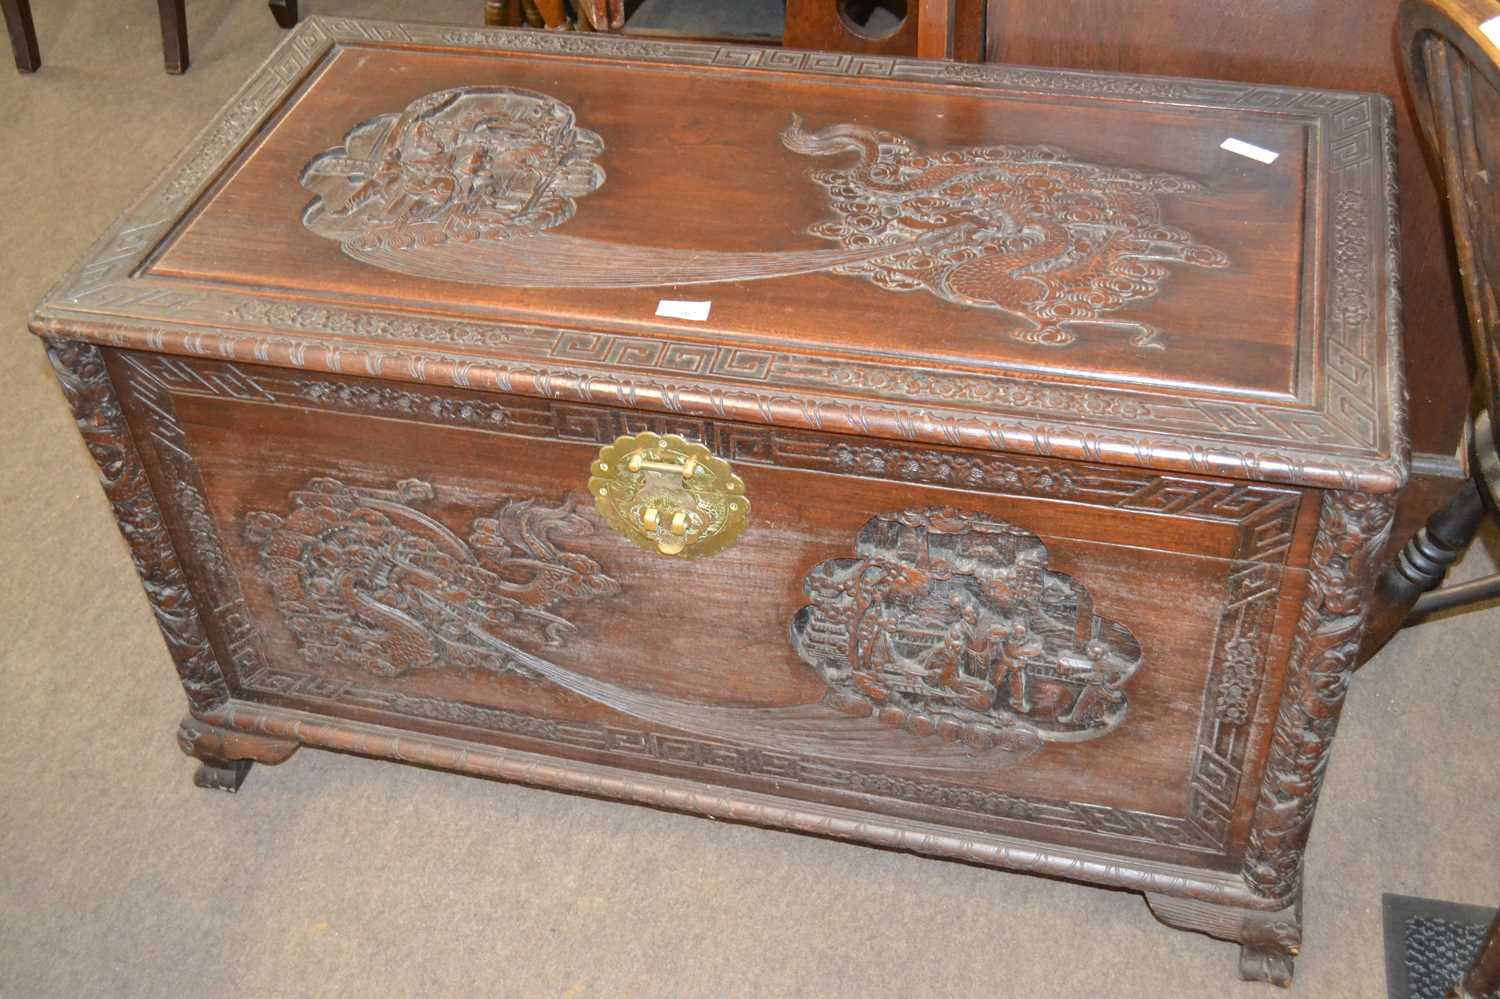 A 20th Century Chinese camphor wood blanket box of hinged rectangular form decorated with carved